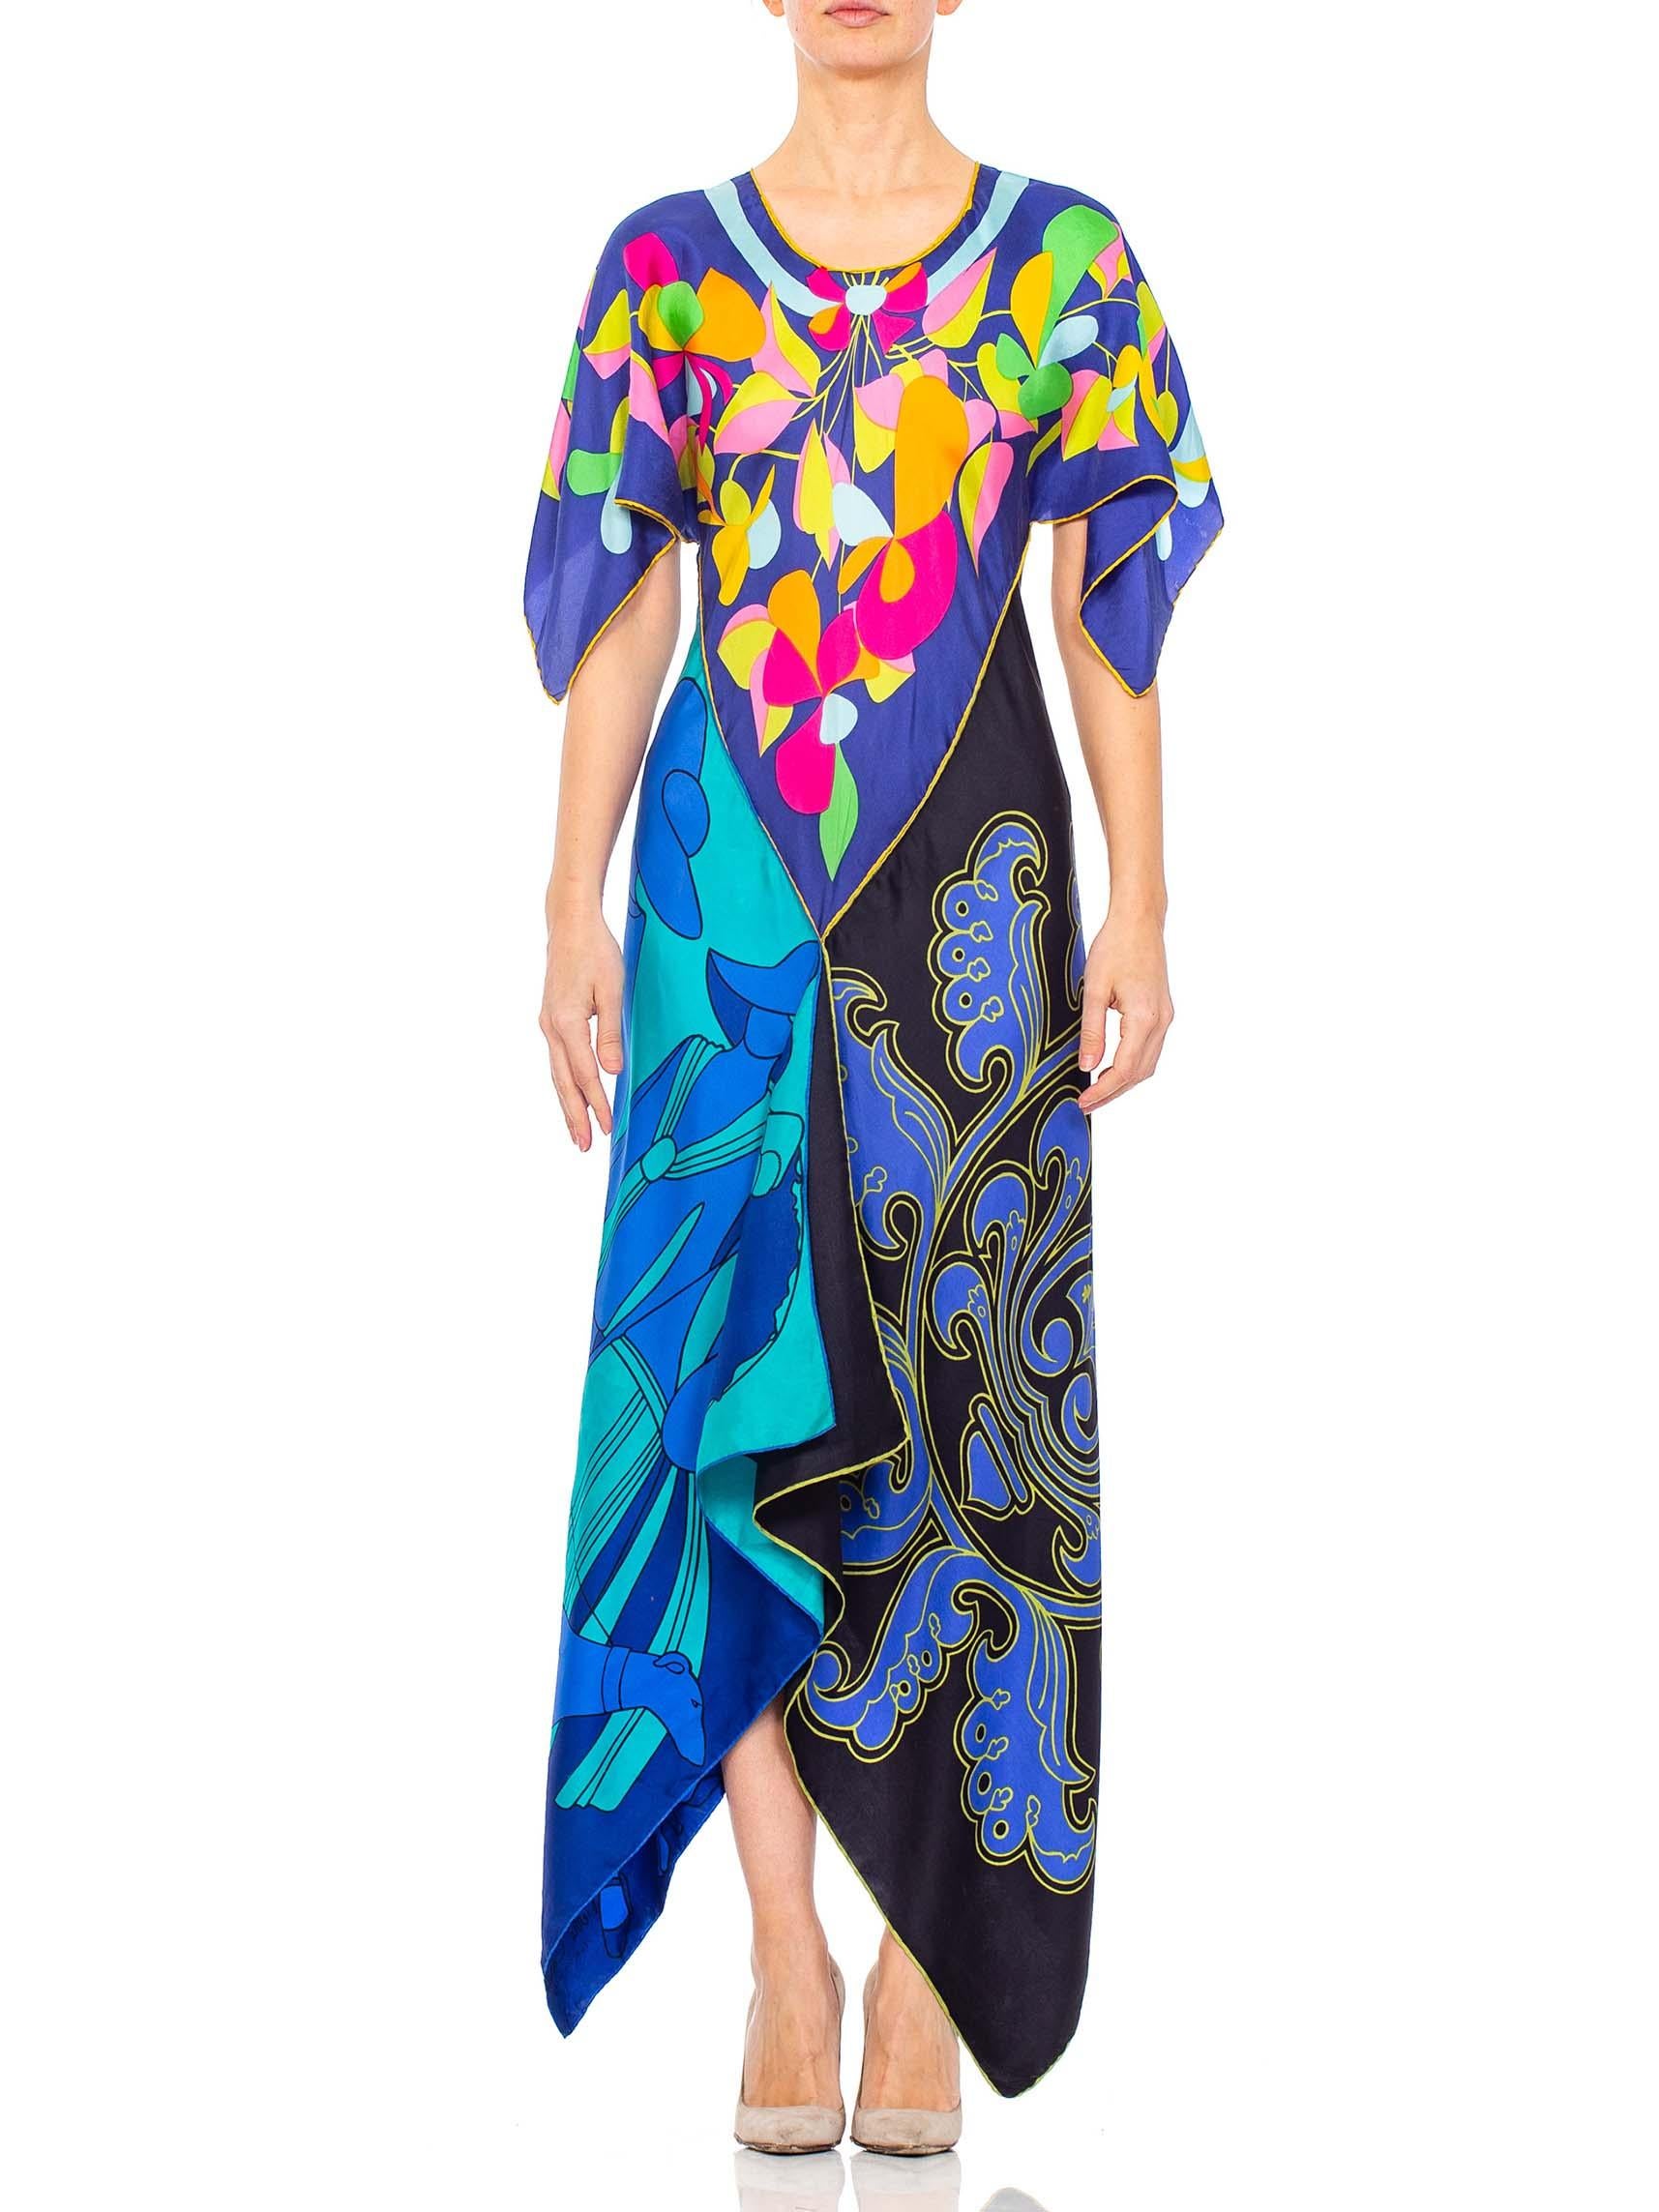 MORPHEW COLLECTION Psychedelic Aqua & Pink Bias Cut Kaftan Dress Made From 1970'S Silk Scarves
MORPHEW COLLECTION is made entirely by hand in our NYC Ateliér of rare antique materials sourced from around the globe. Our sustainable vintage materials